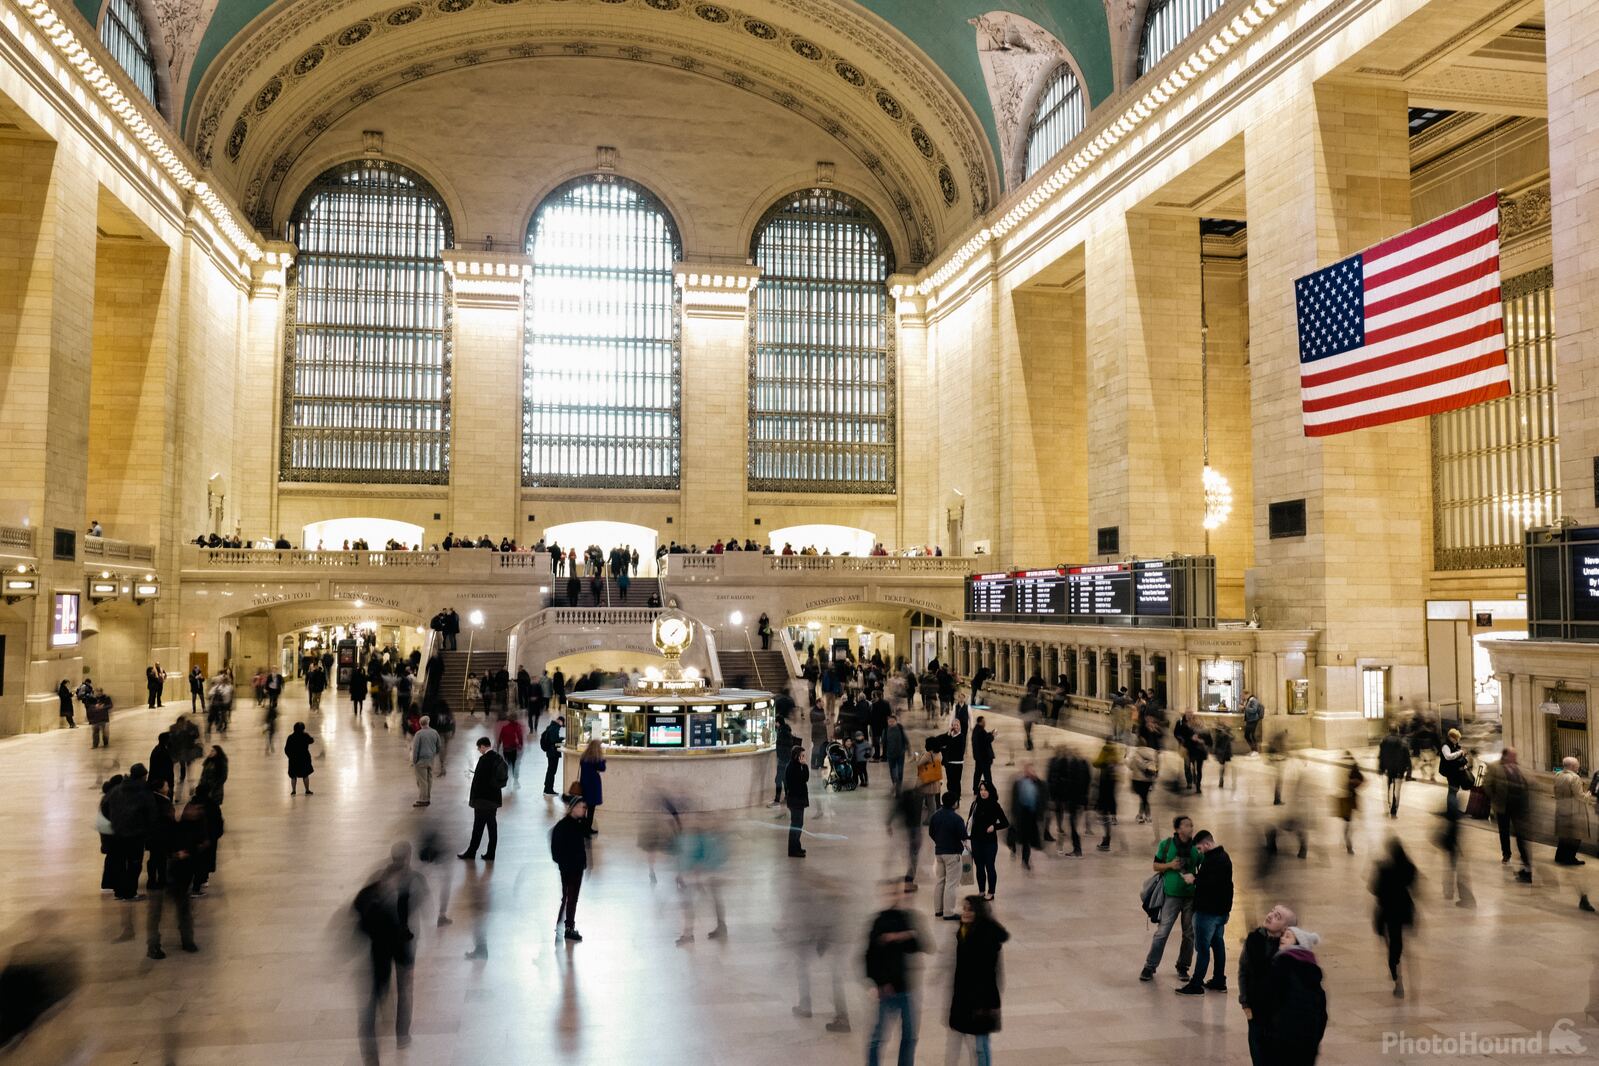 Image of Grand Central Terminal by Team PhotoHound